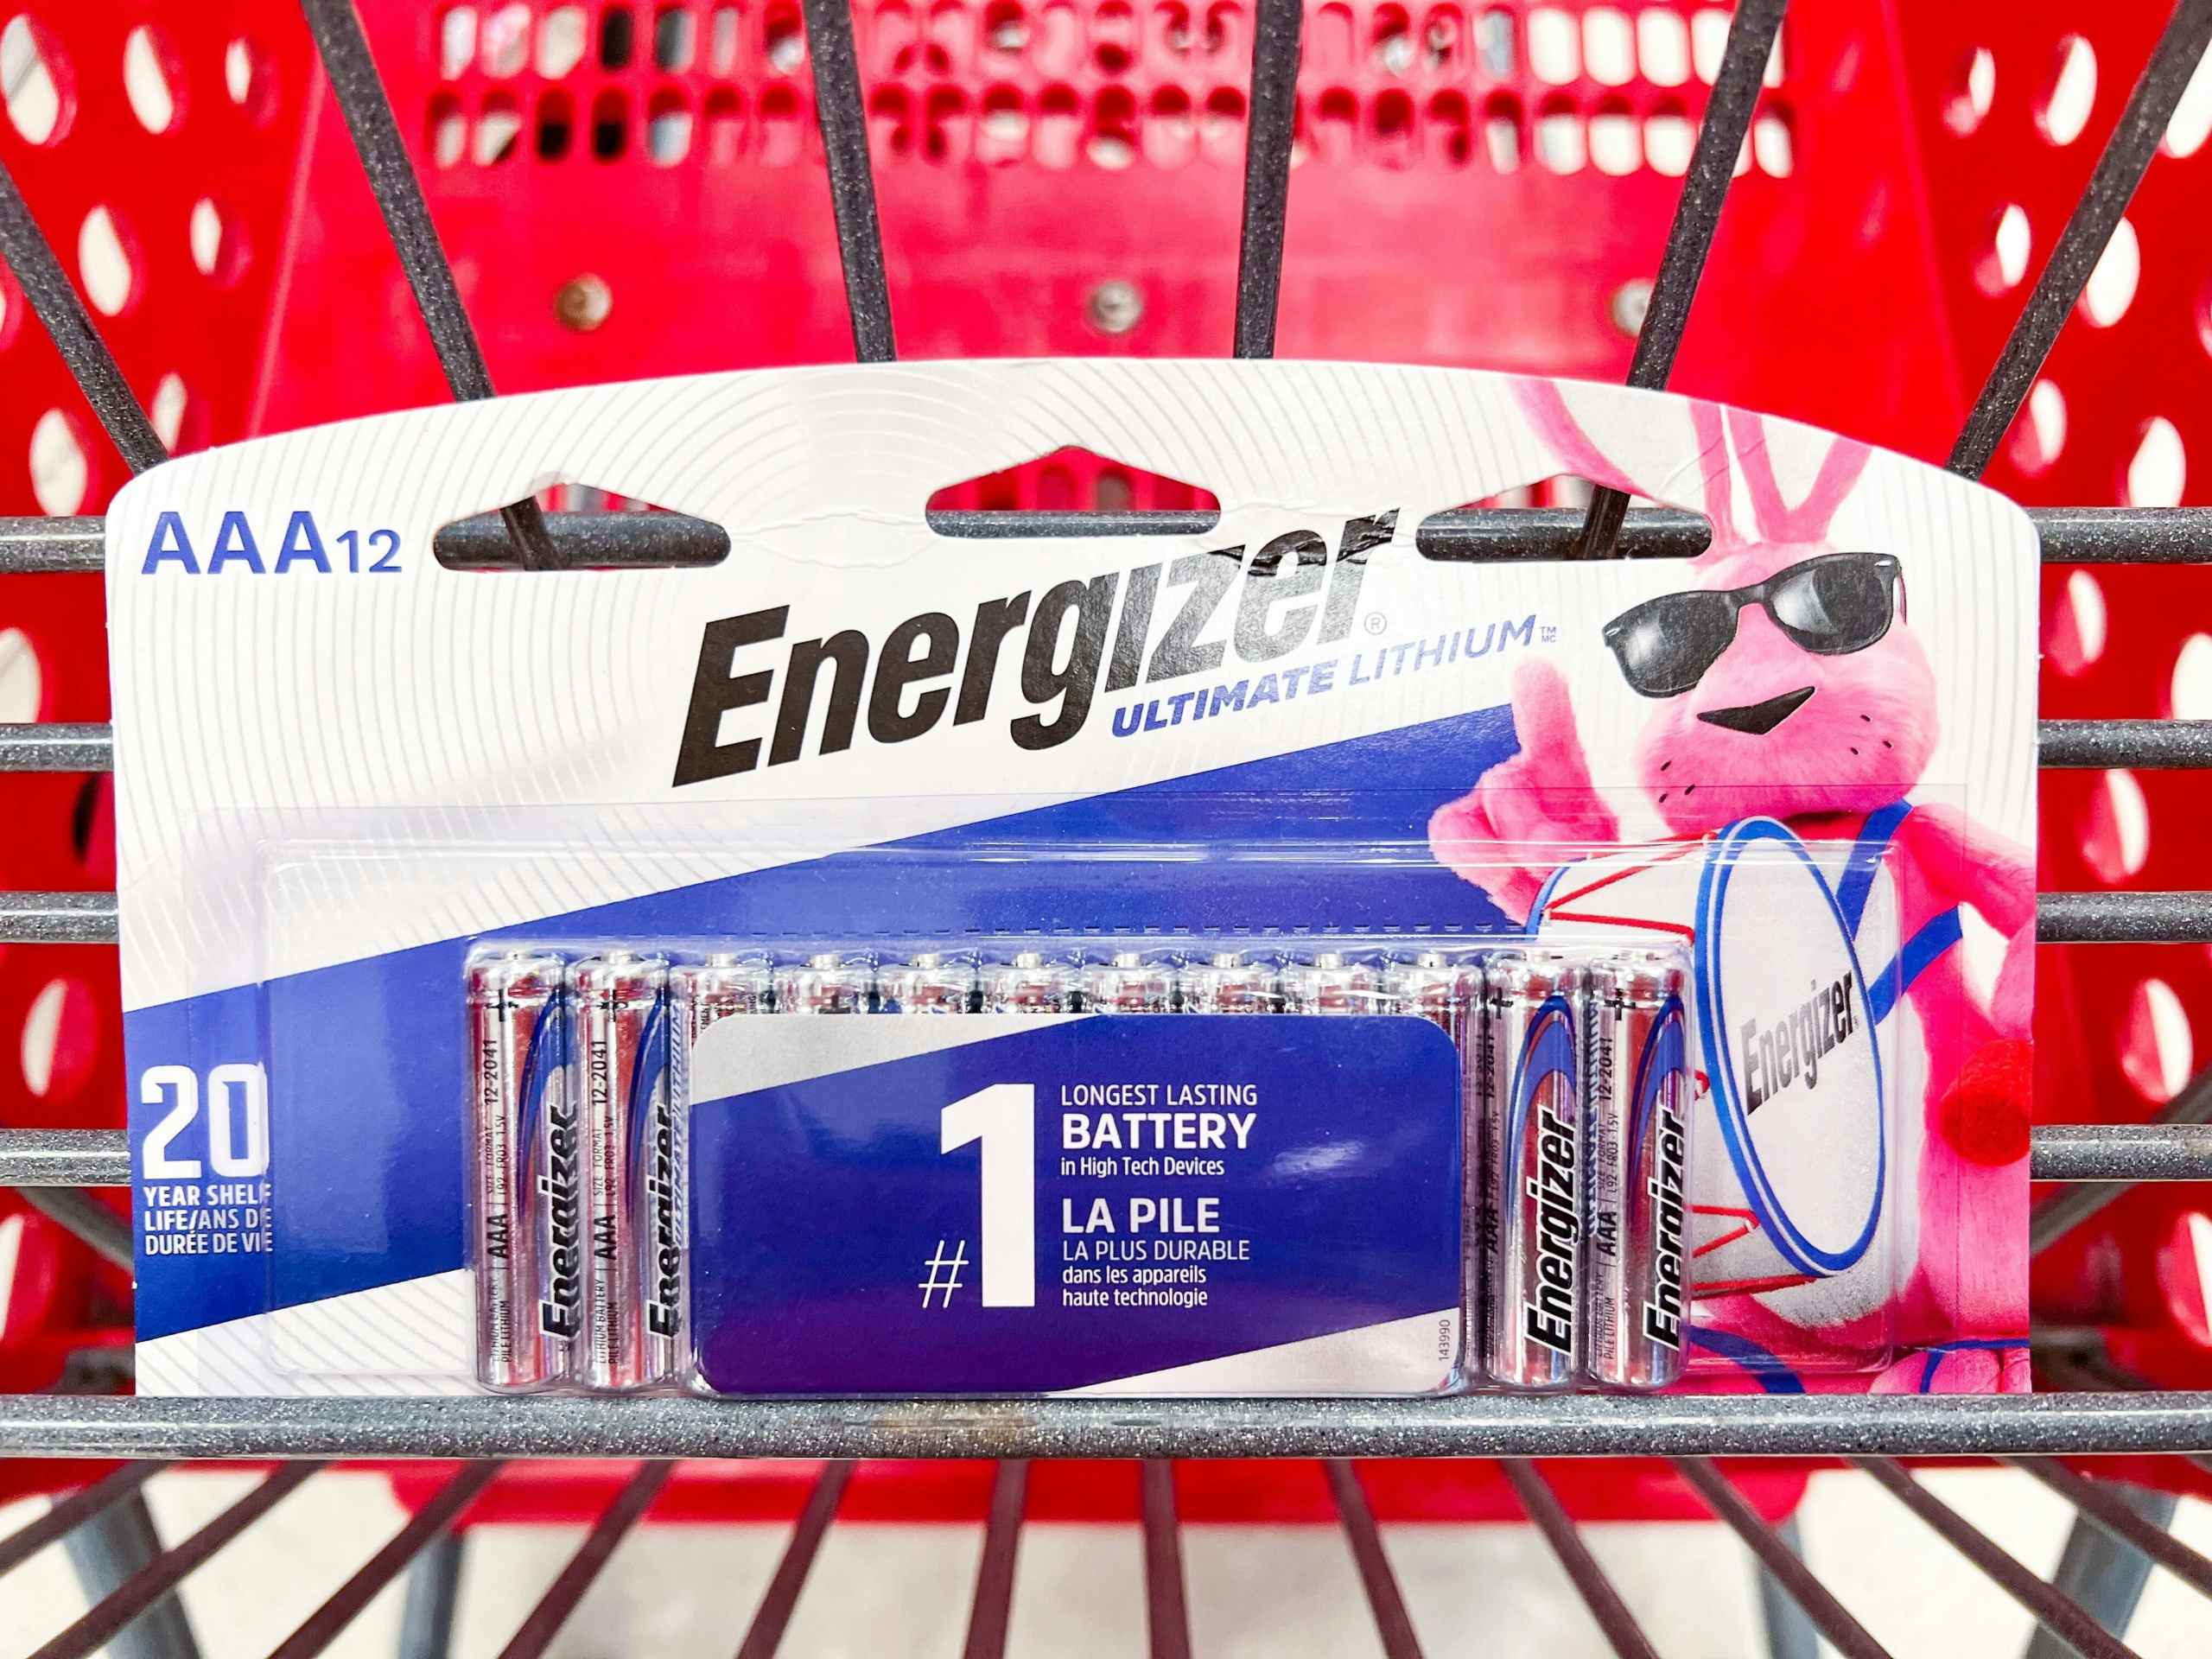 Energizer batteries in package inside Target shopping cart